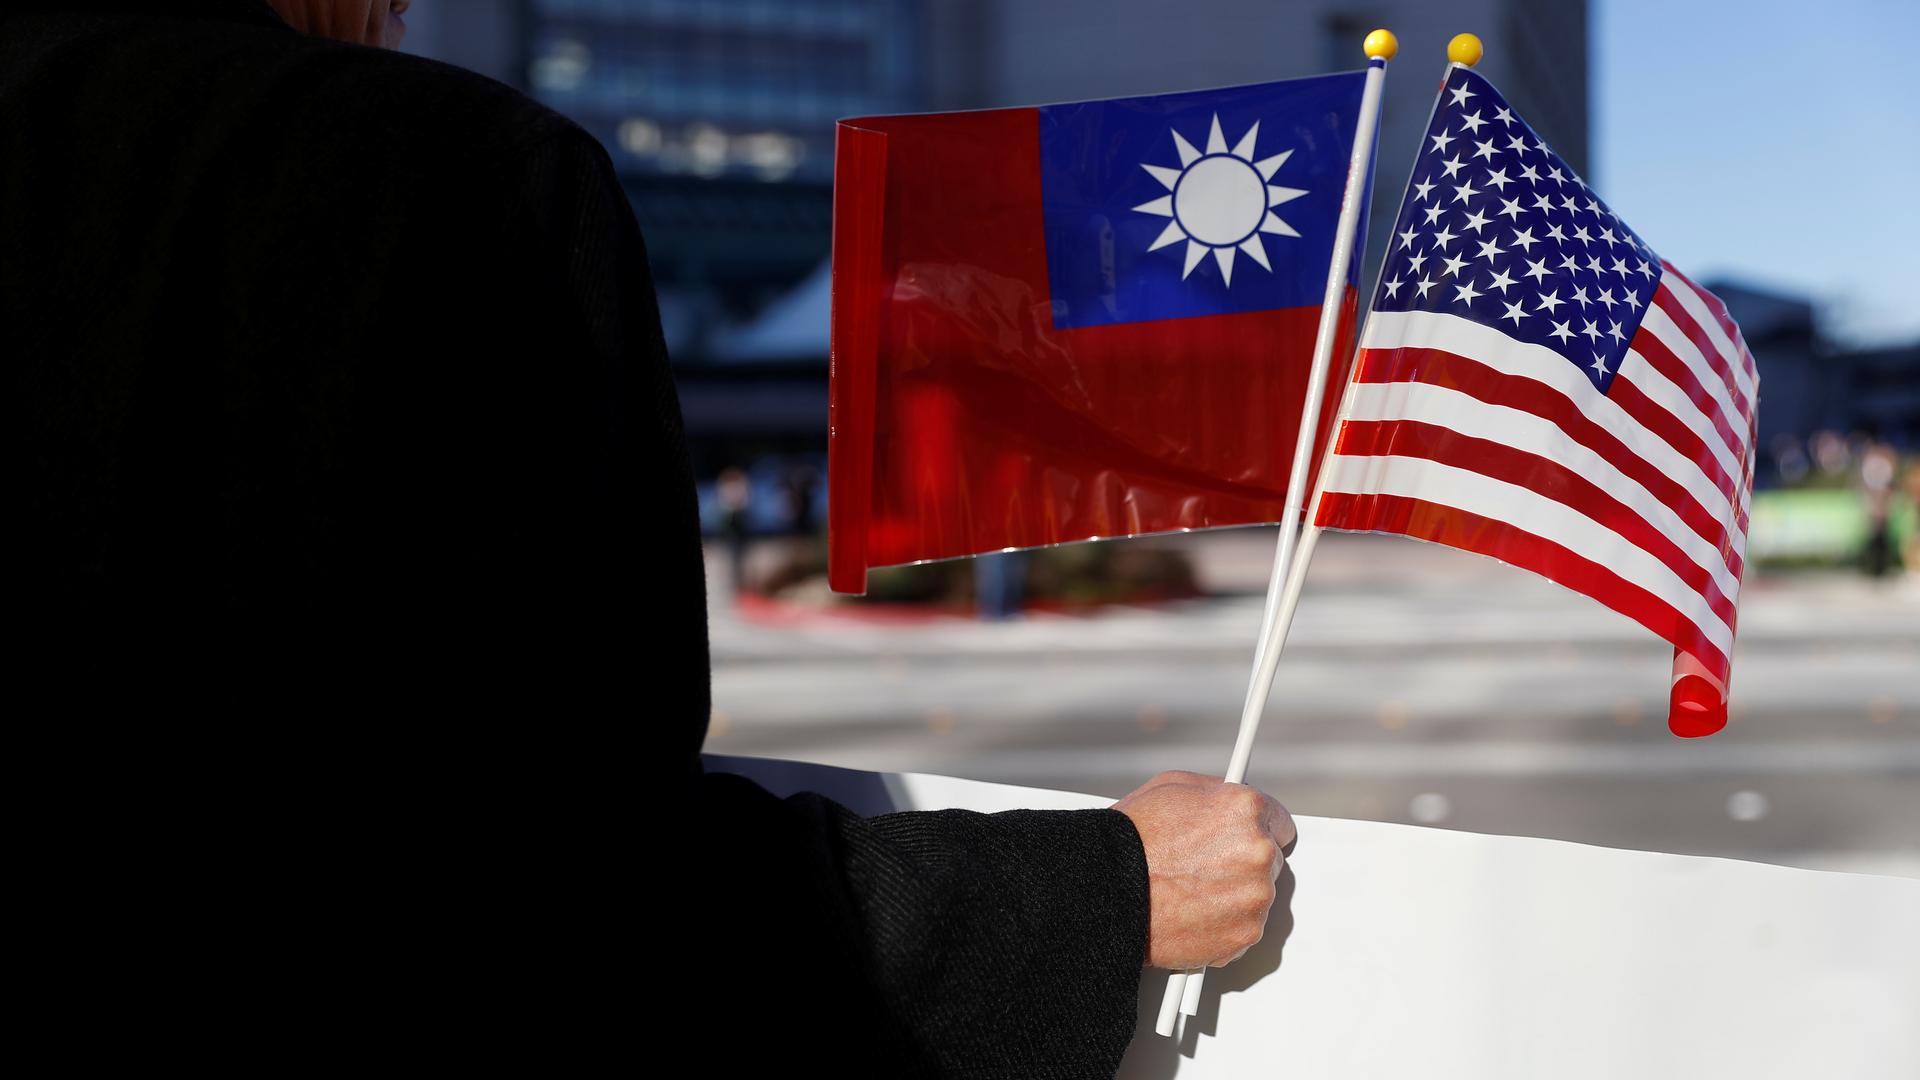 taiwanese and US flags together